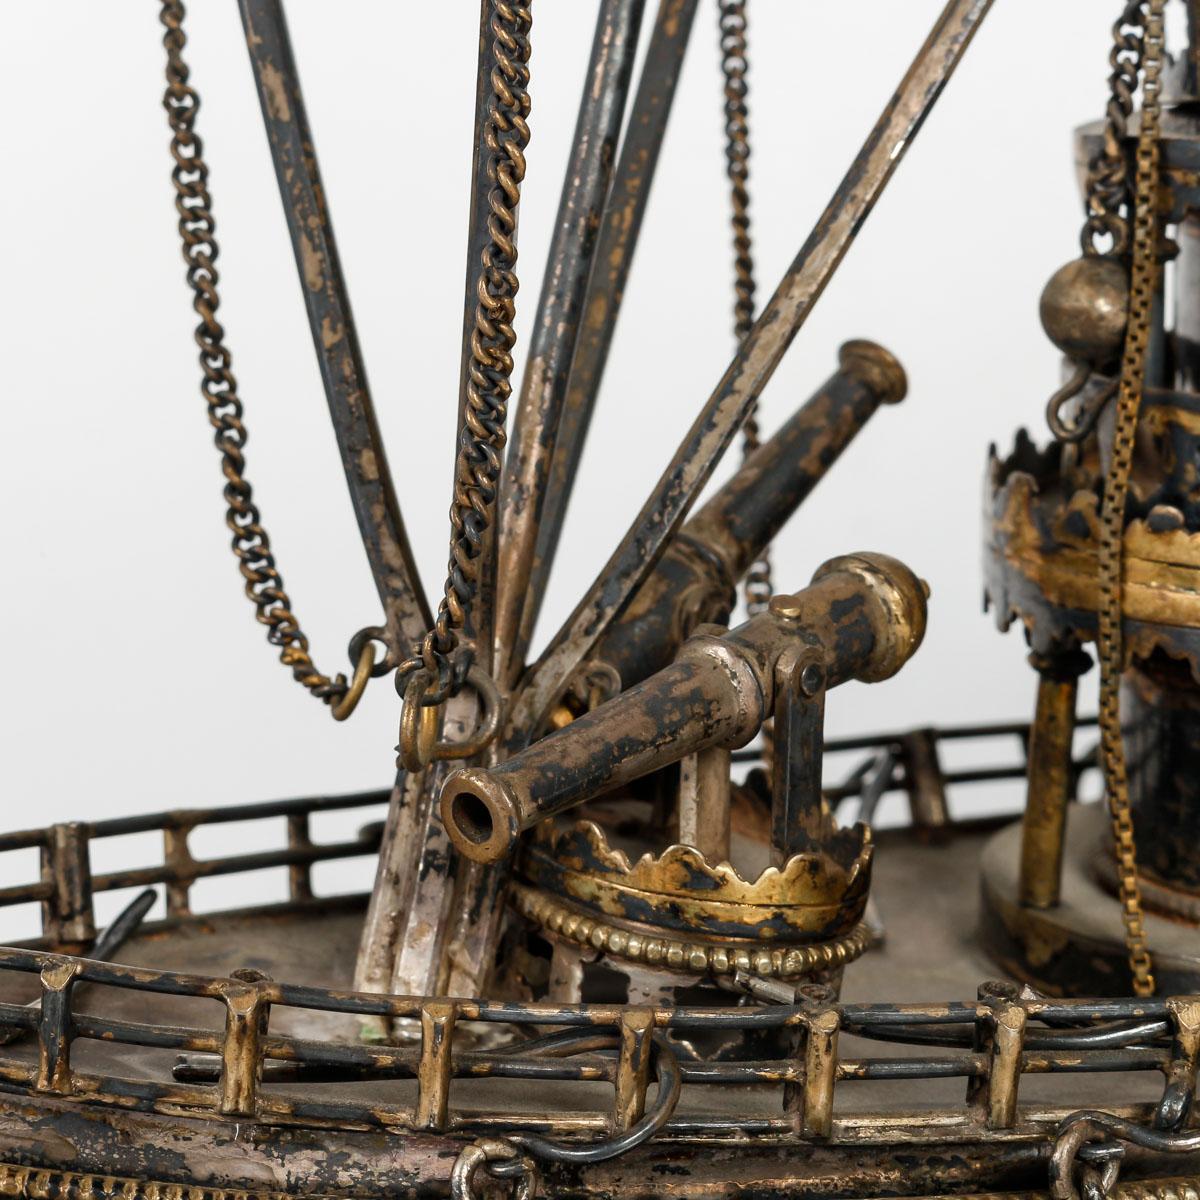 Miniature Army Boat in Sterling Silver, 19th Century, English Work. 3